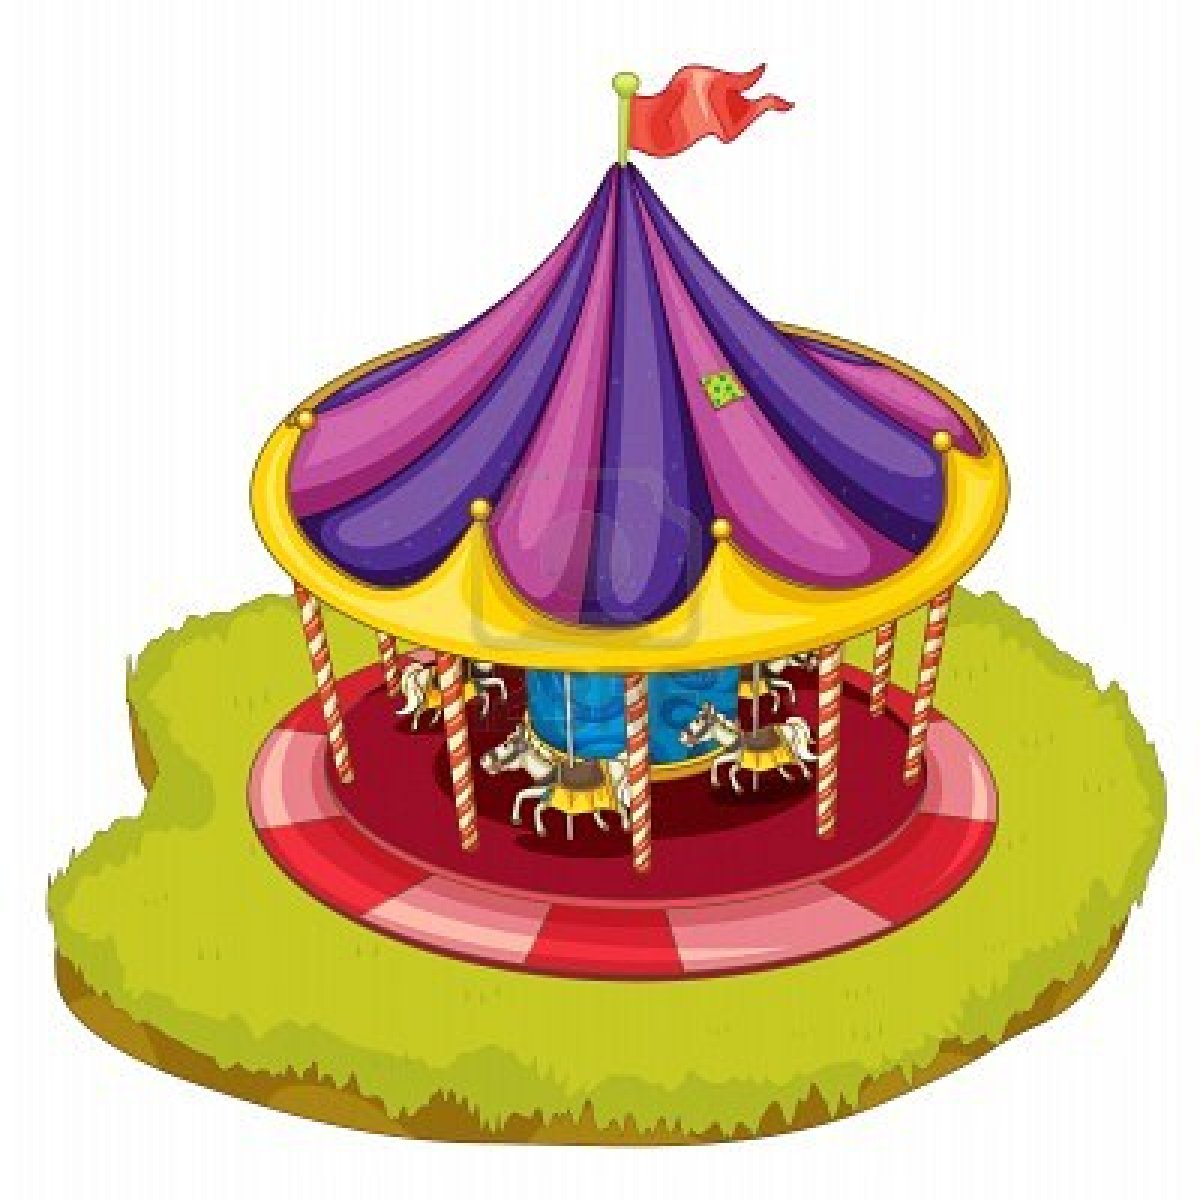 Of A Carnival Ride   Free Images At Clker Com   Vector Clip